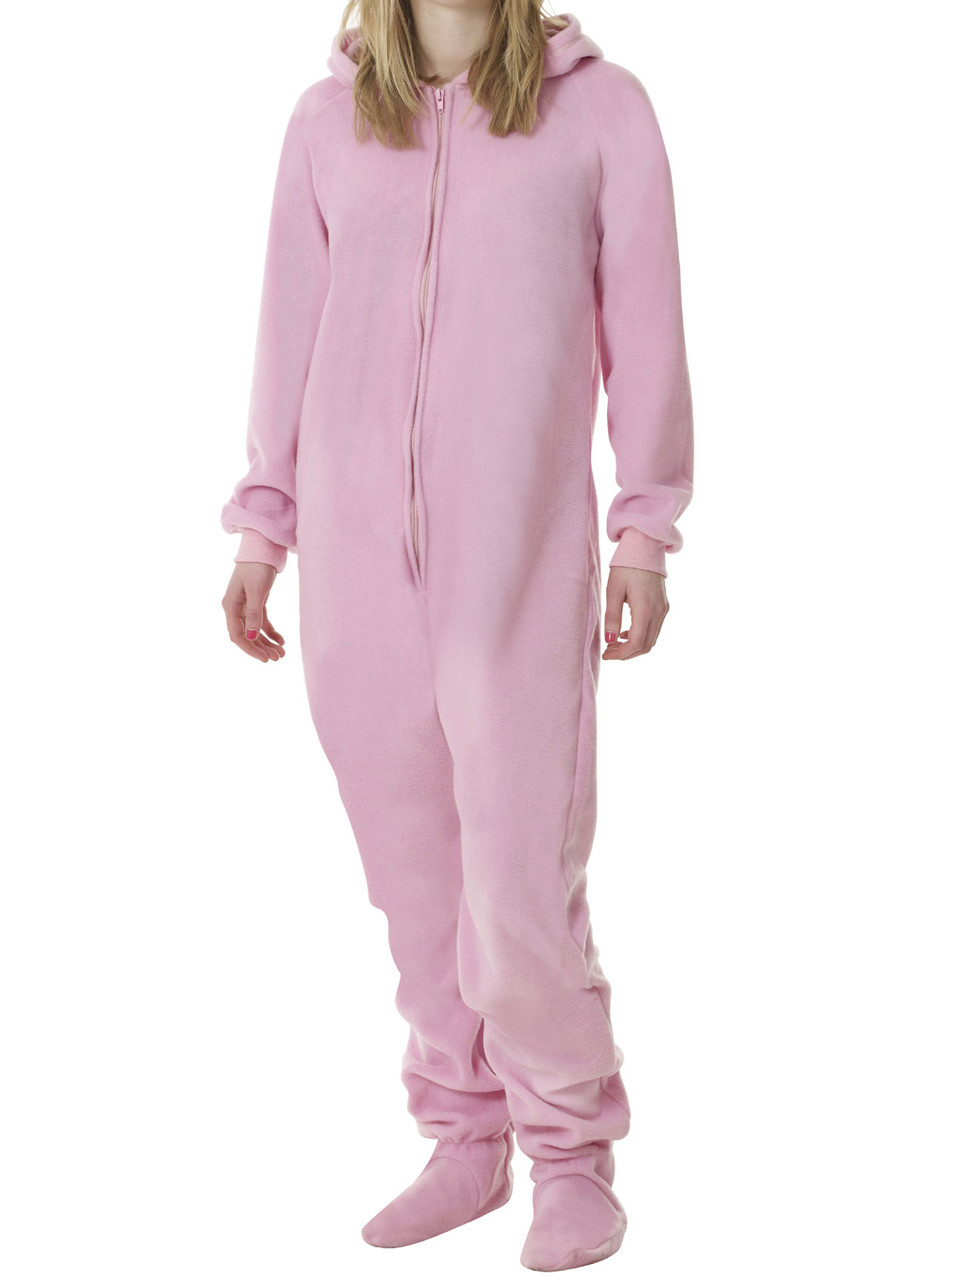 Cuddlz Baby Pink footed onesie for adults with feet adult baby footed  sleeper abdl onesies pjs pyjamas abdl 